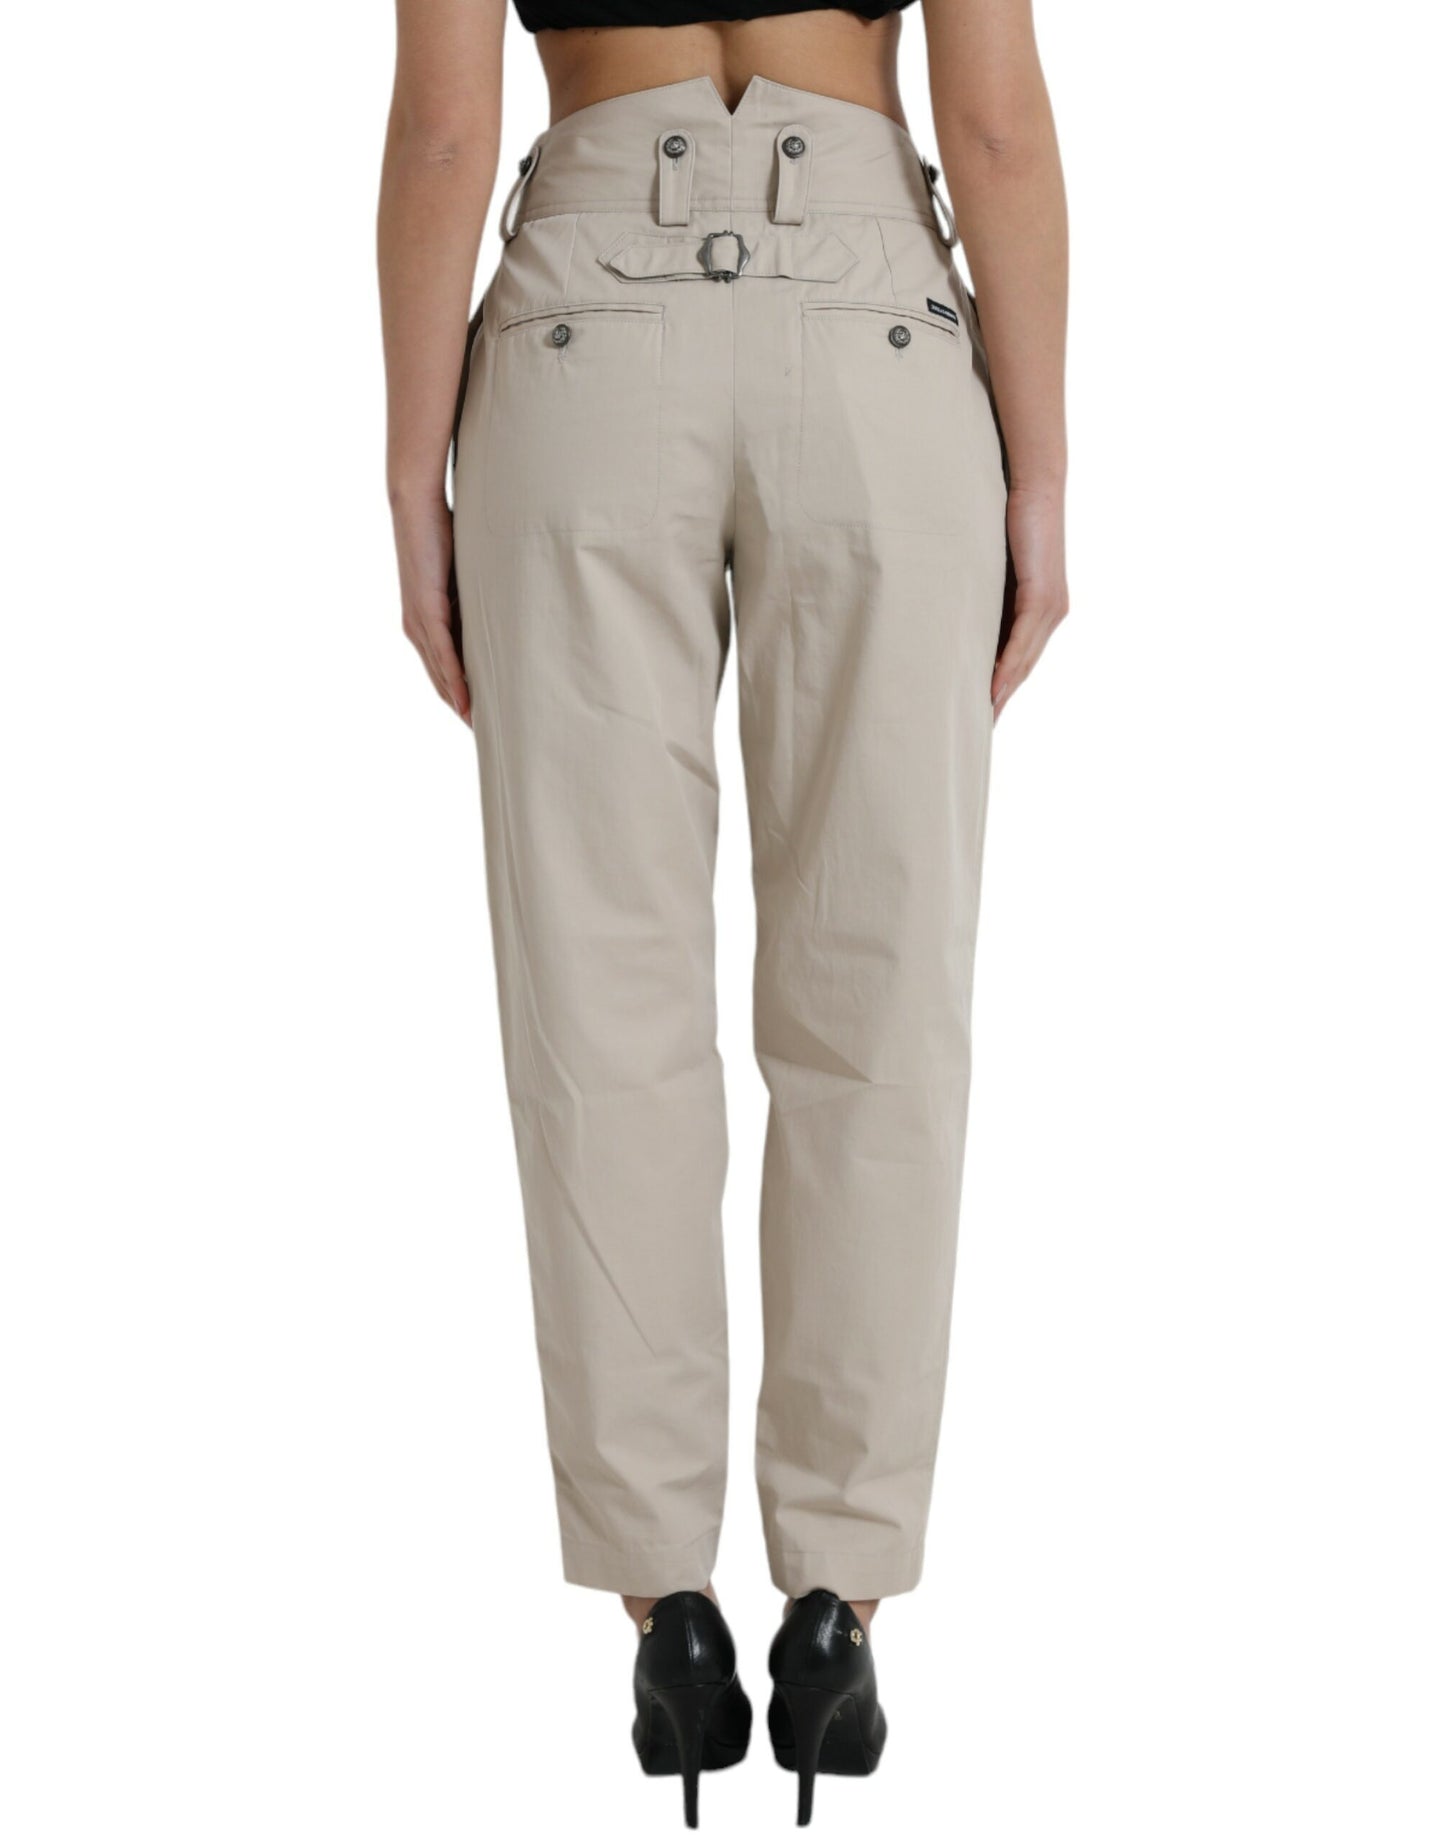 High-Waisted Tapered Fashion Pants - Beige